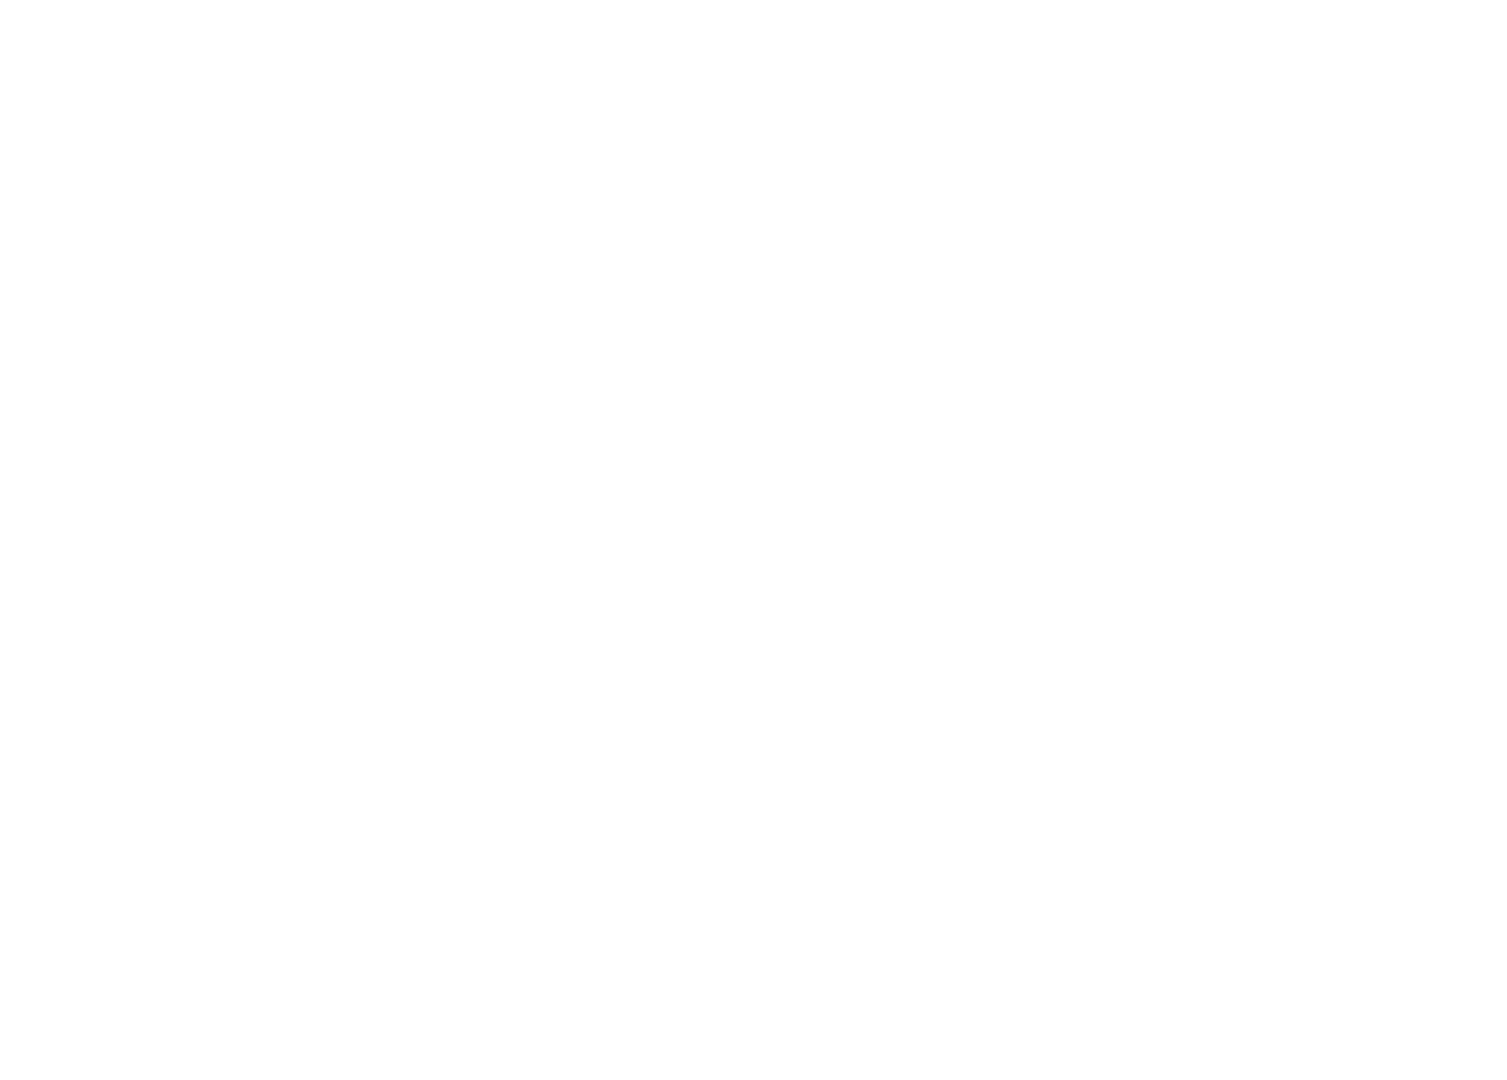 AFAA Approved Provider